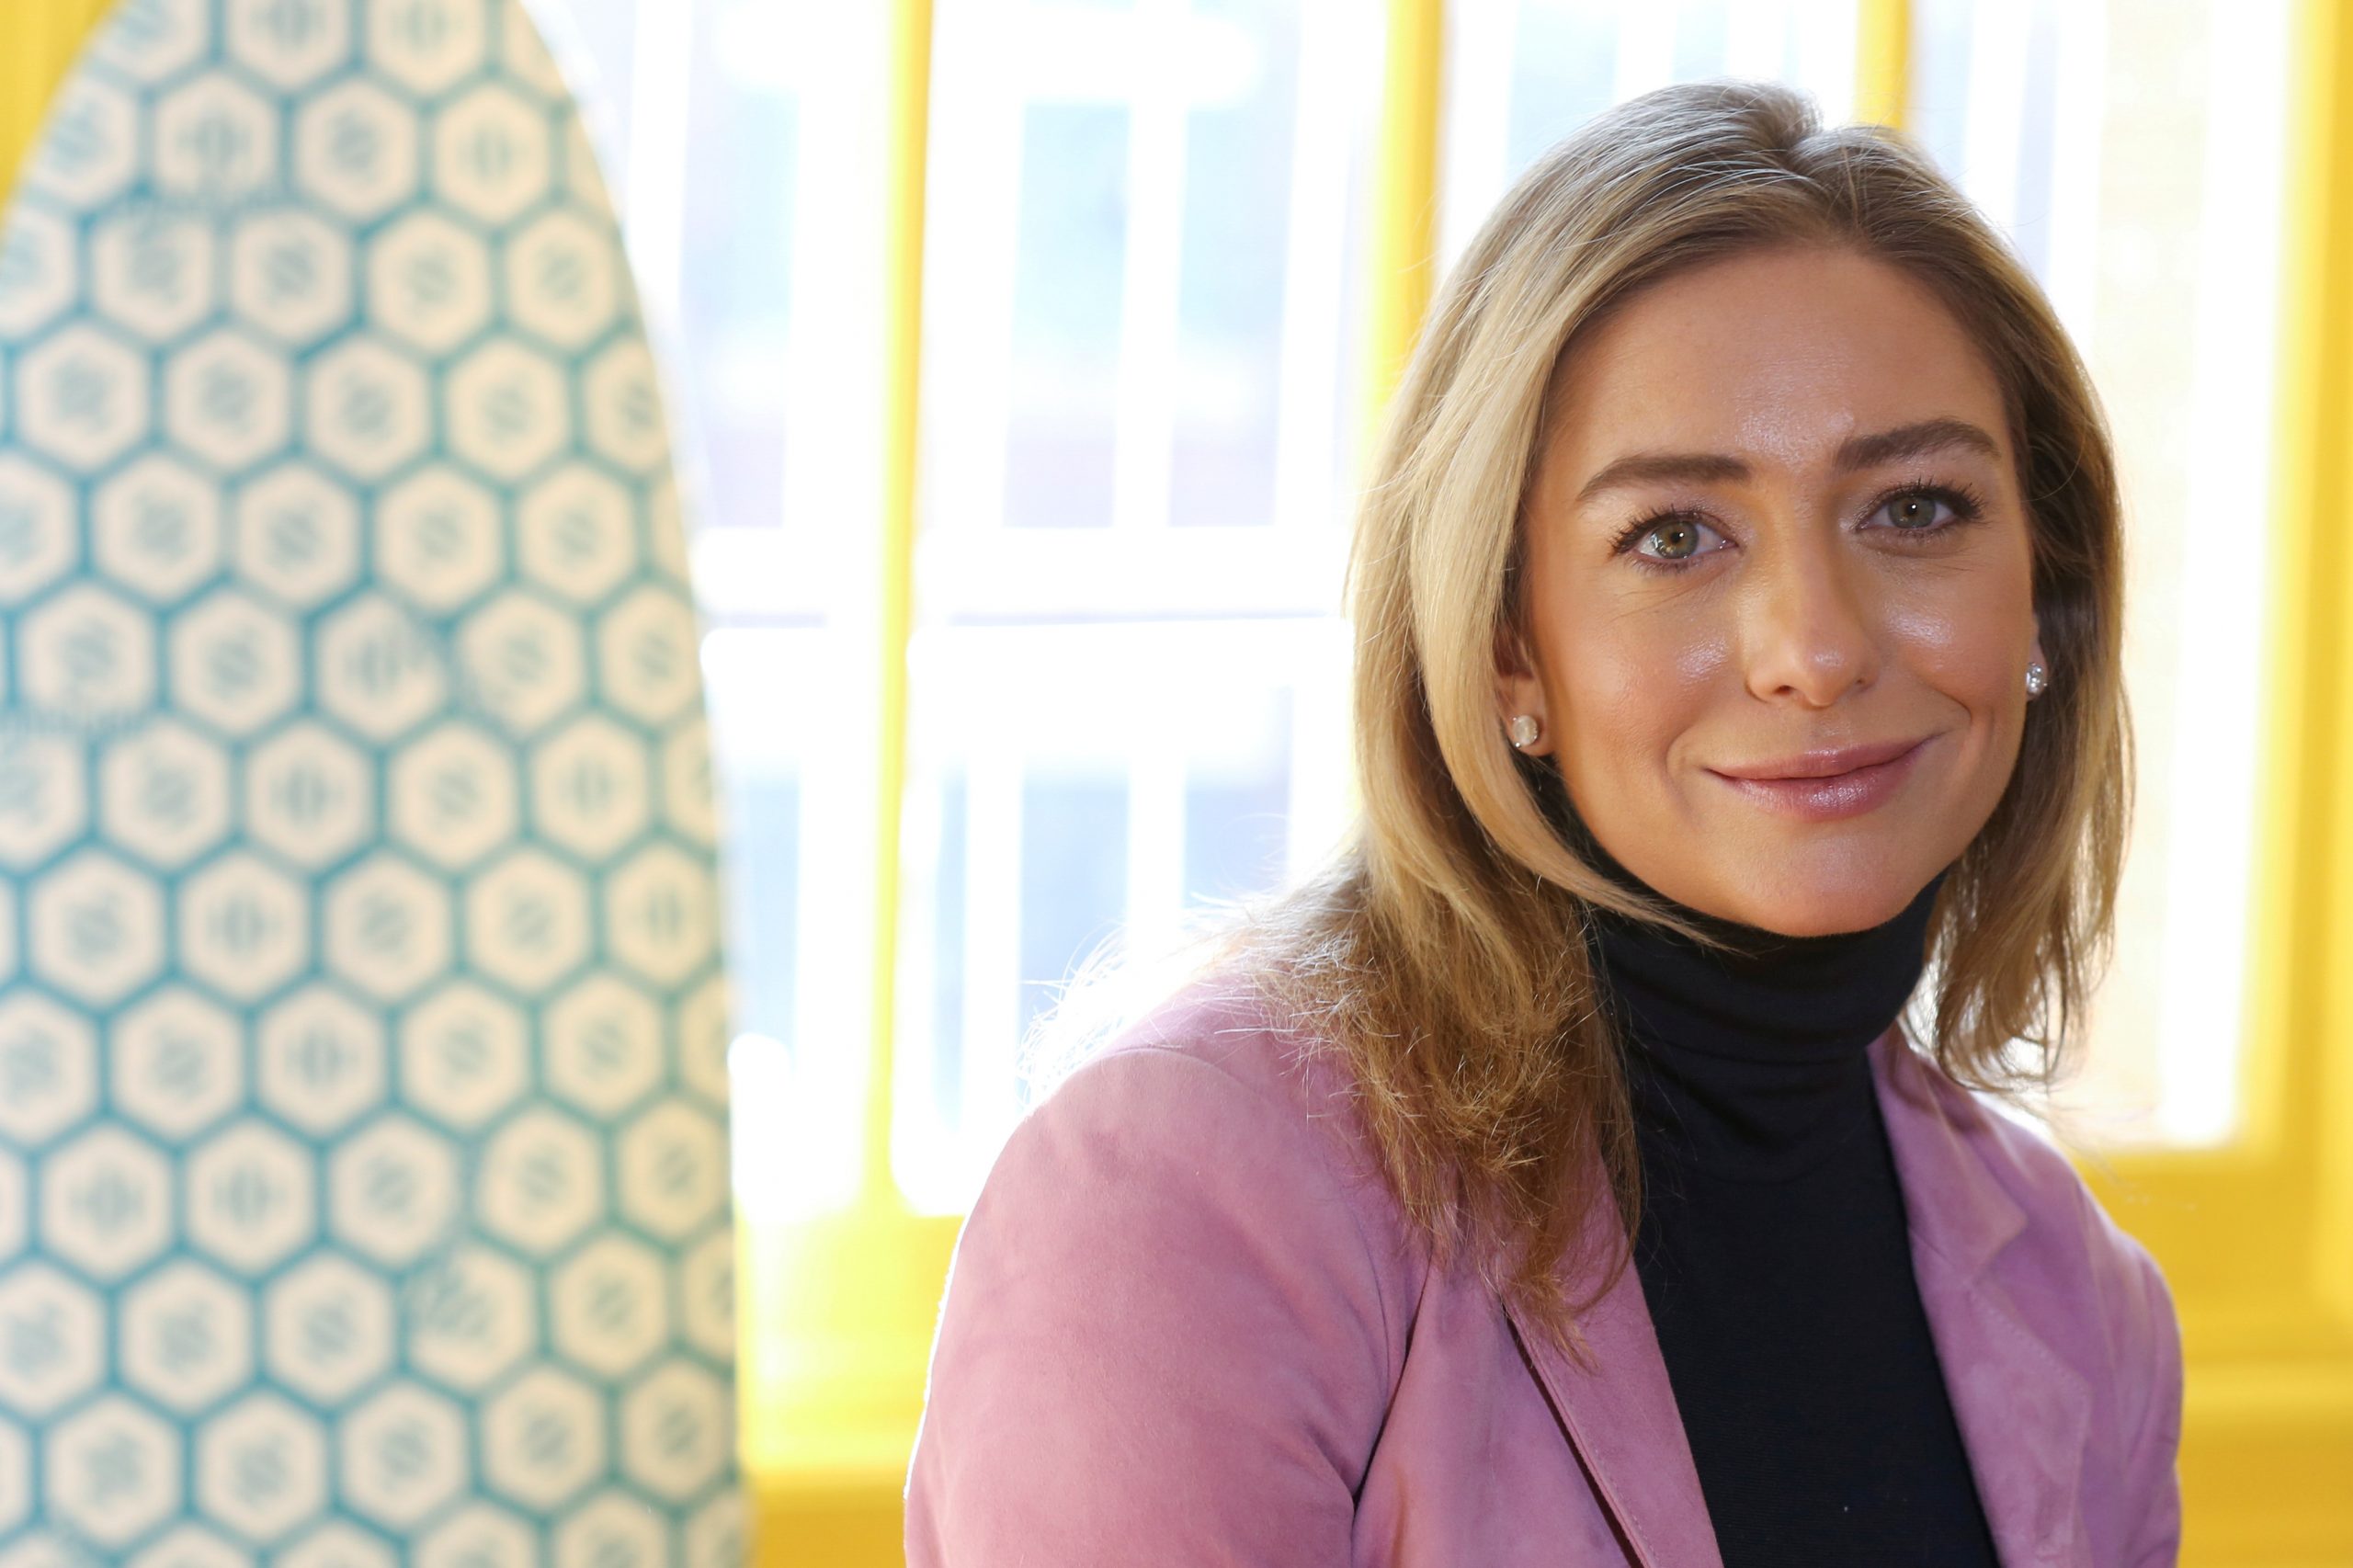 Bumble founder and CEO Whitney Wolfe Herd sits for a portrait in the Manhattan borough of New York City, U.S., January 31, 2019.